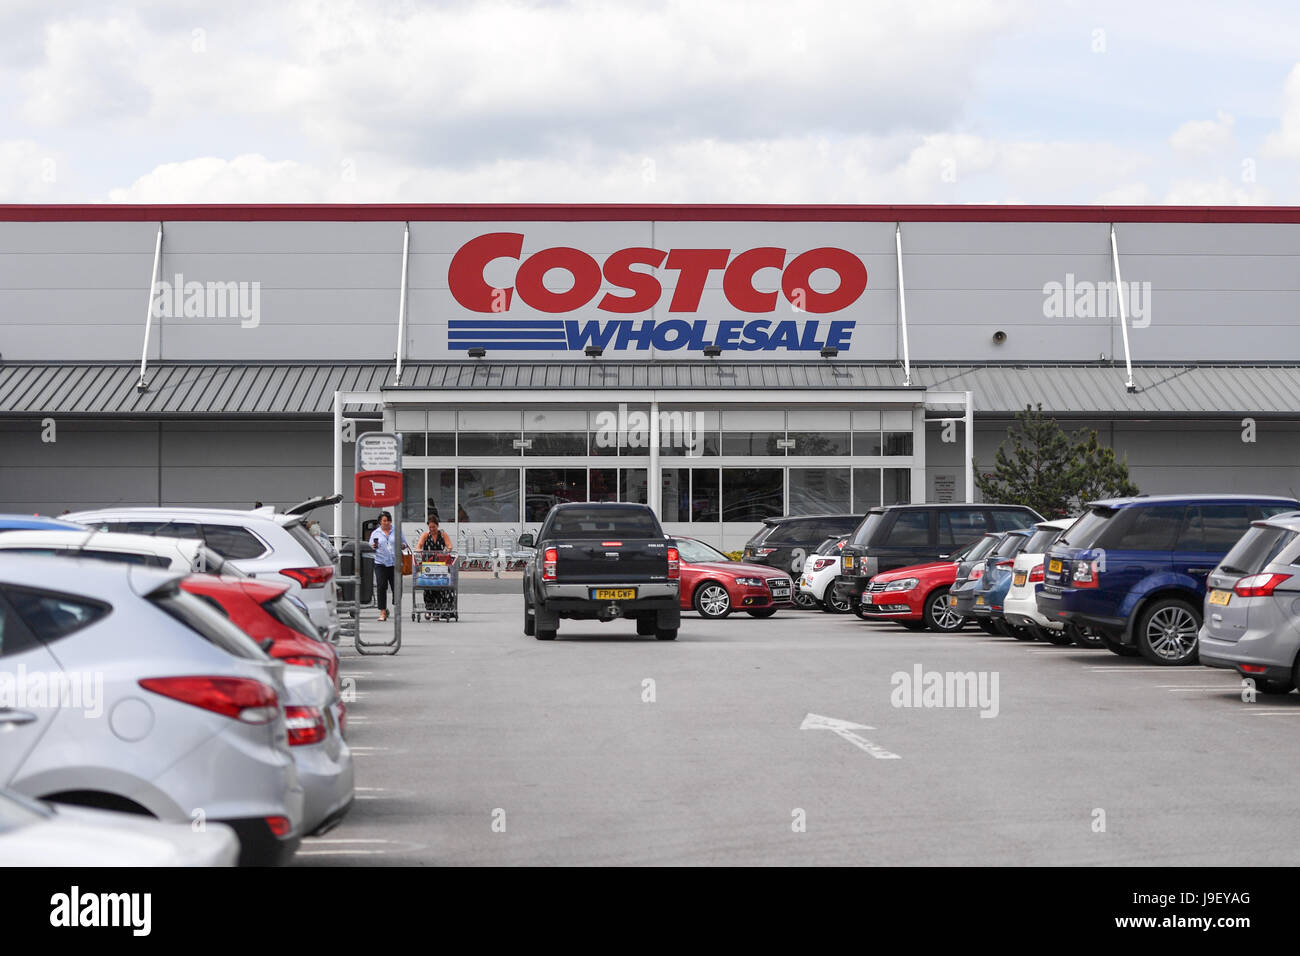 Costco store sign with a view of the carpark Stock Photo